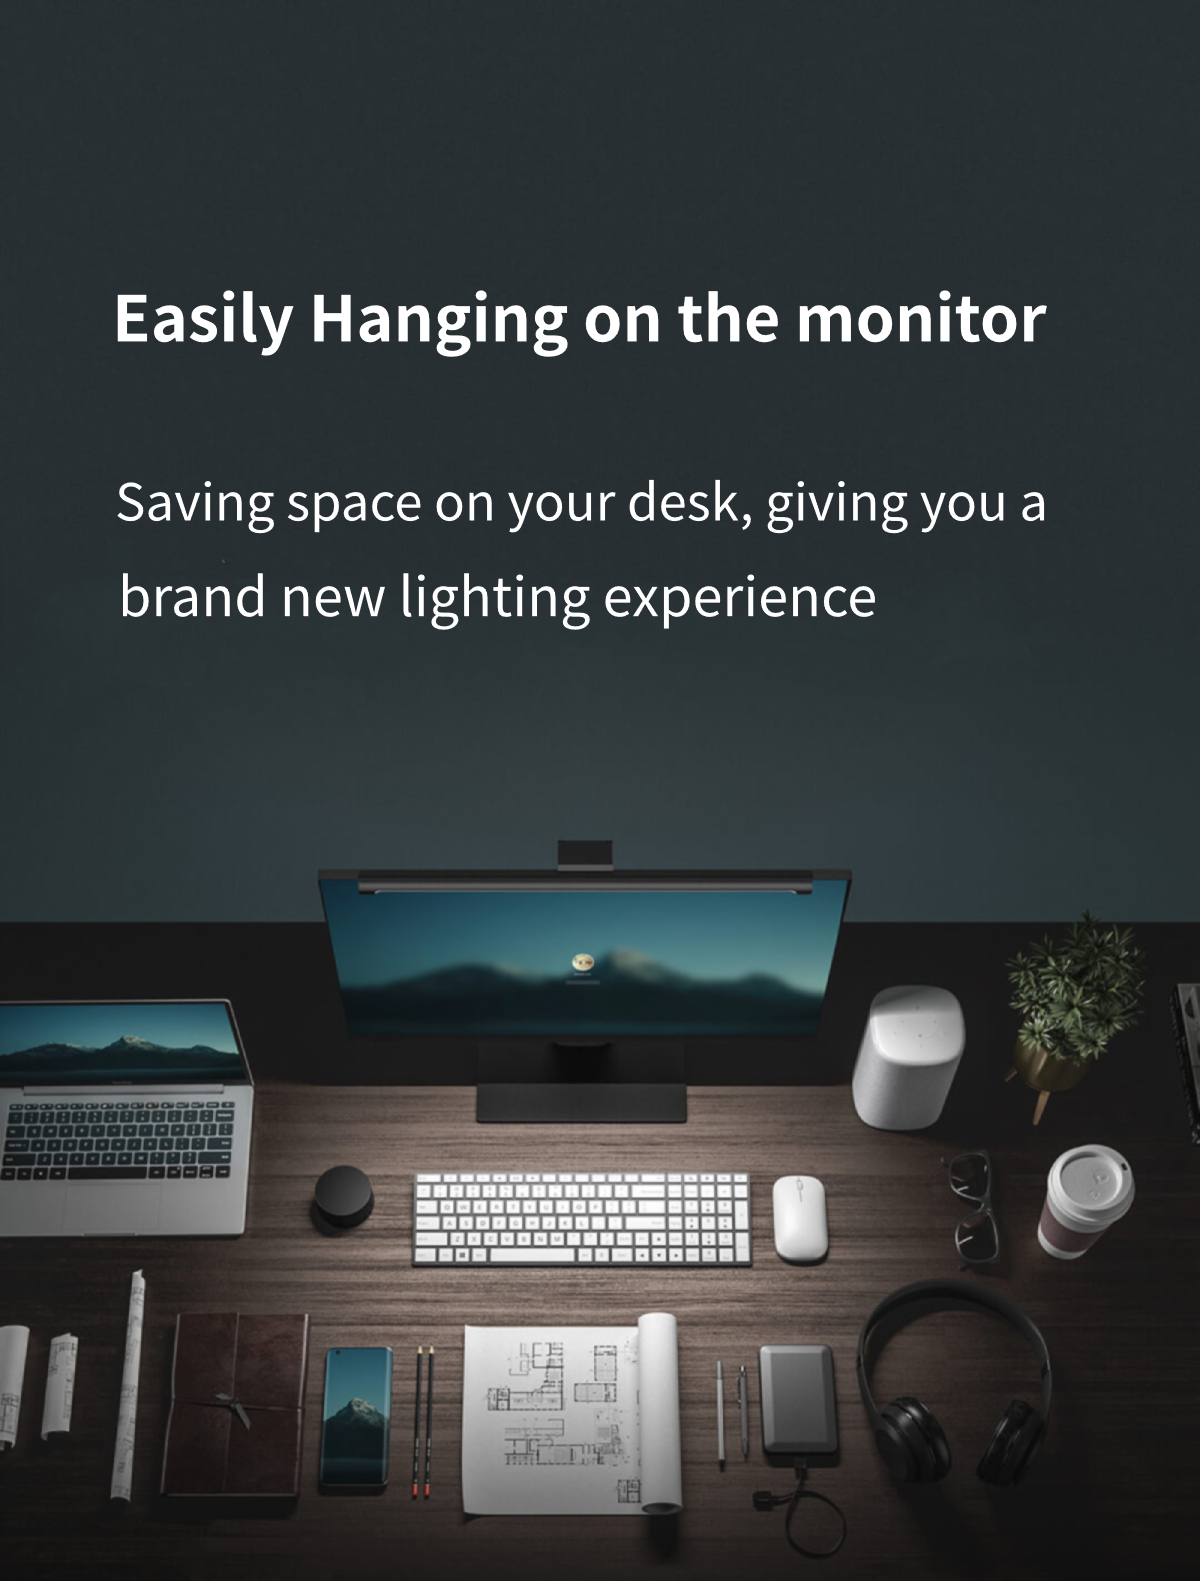 XIAOMI-Mi-Computer-Monitor-Light-Bar-Eyes-Protection-Reading-Dimmable-PC-Computer-USB-Lamp-Display-H-1690642-2